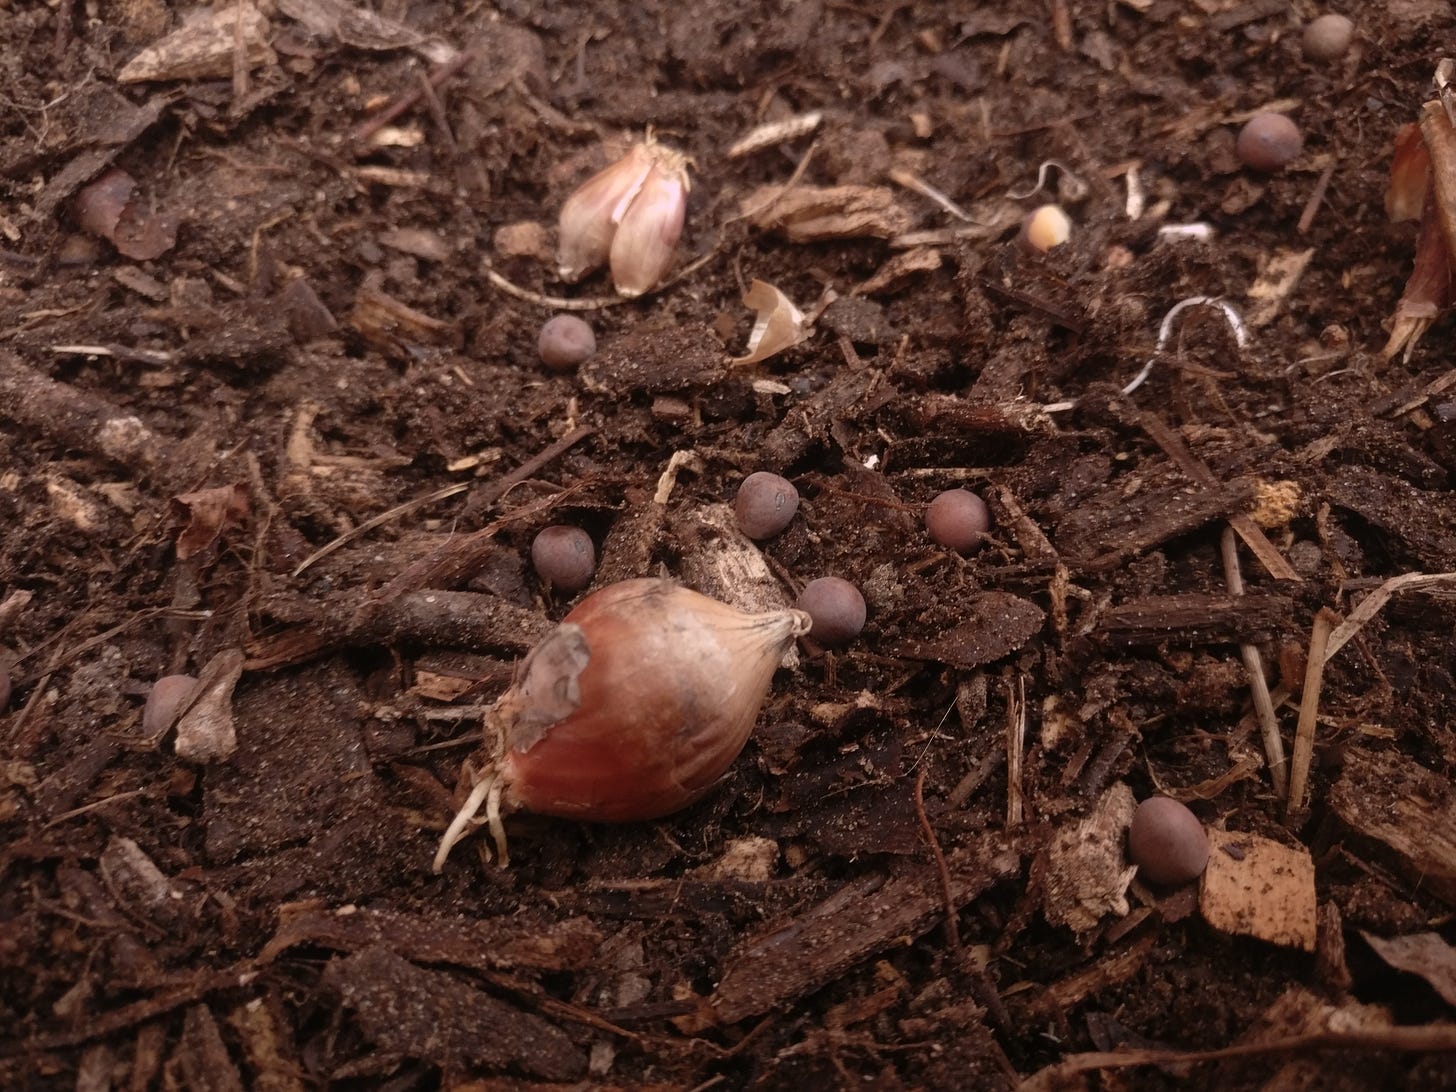 A photograph of some onion bulbs and pea seeds resting on soil.